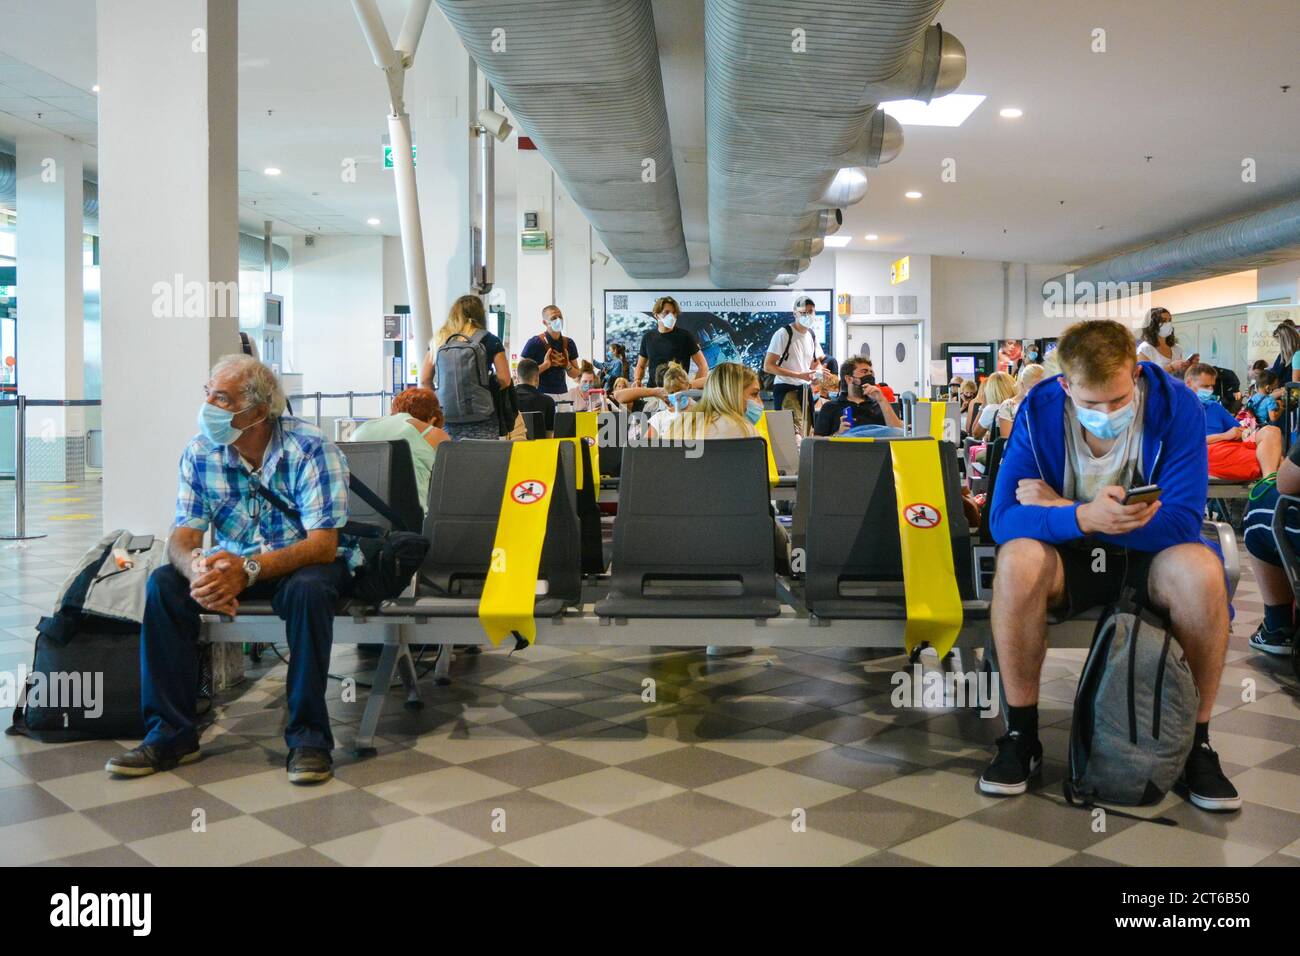 An old and a young passenger wearing coronavirus protection masks sit and wait mantaining social distancing at the terminal of Pisa Airport, Italy Stock Photo